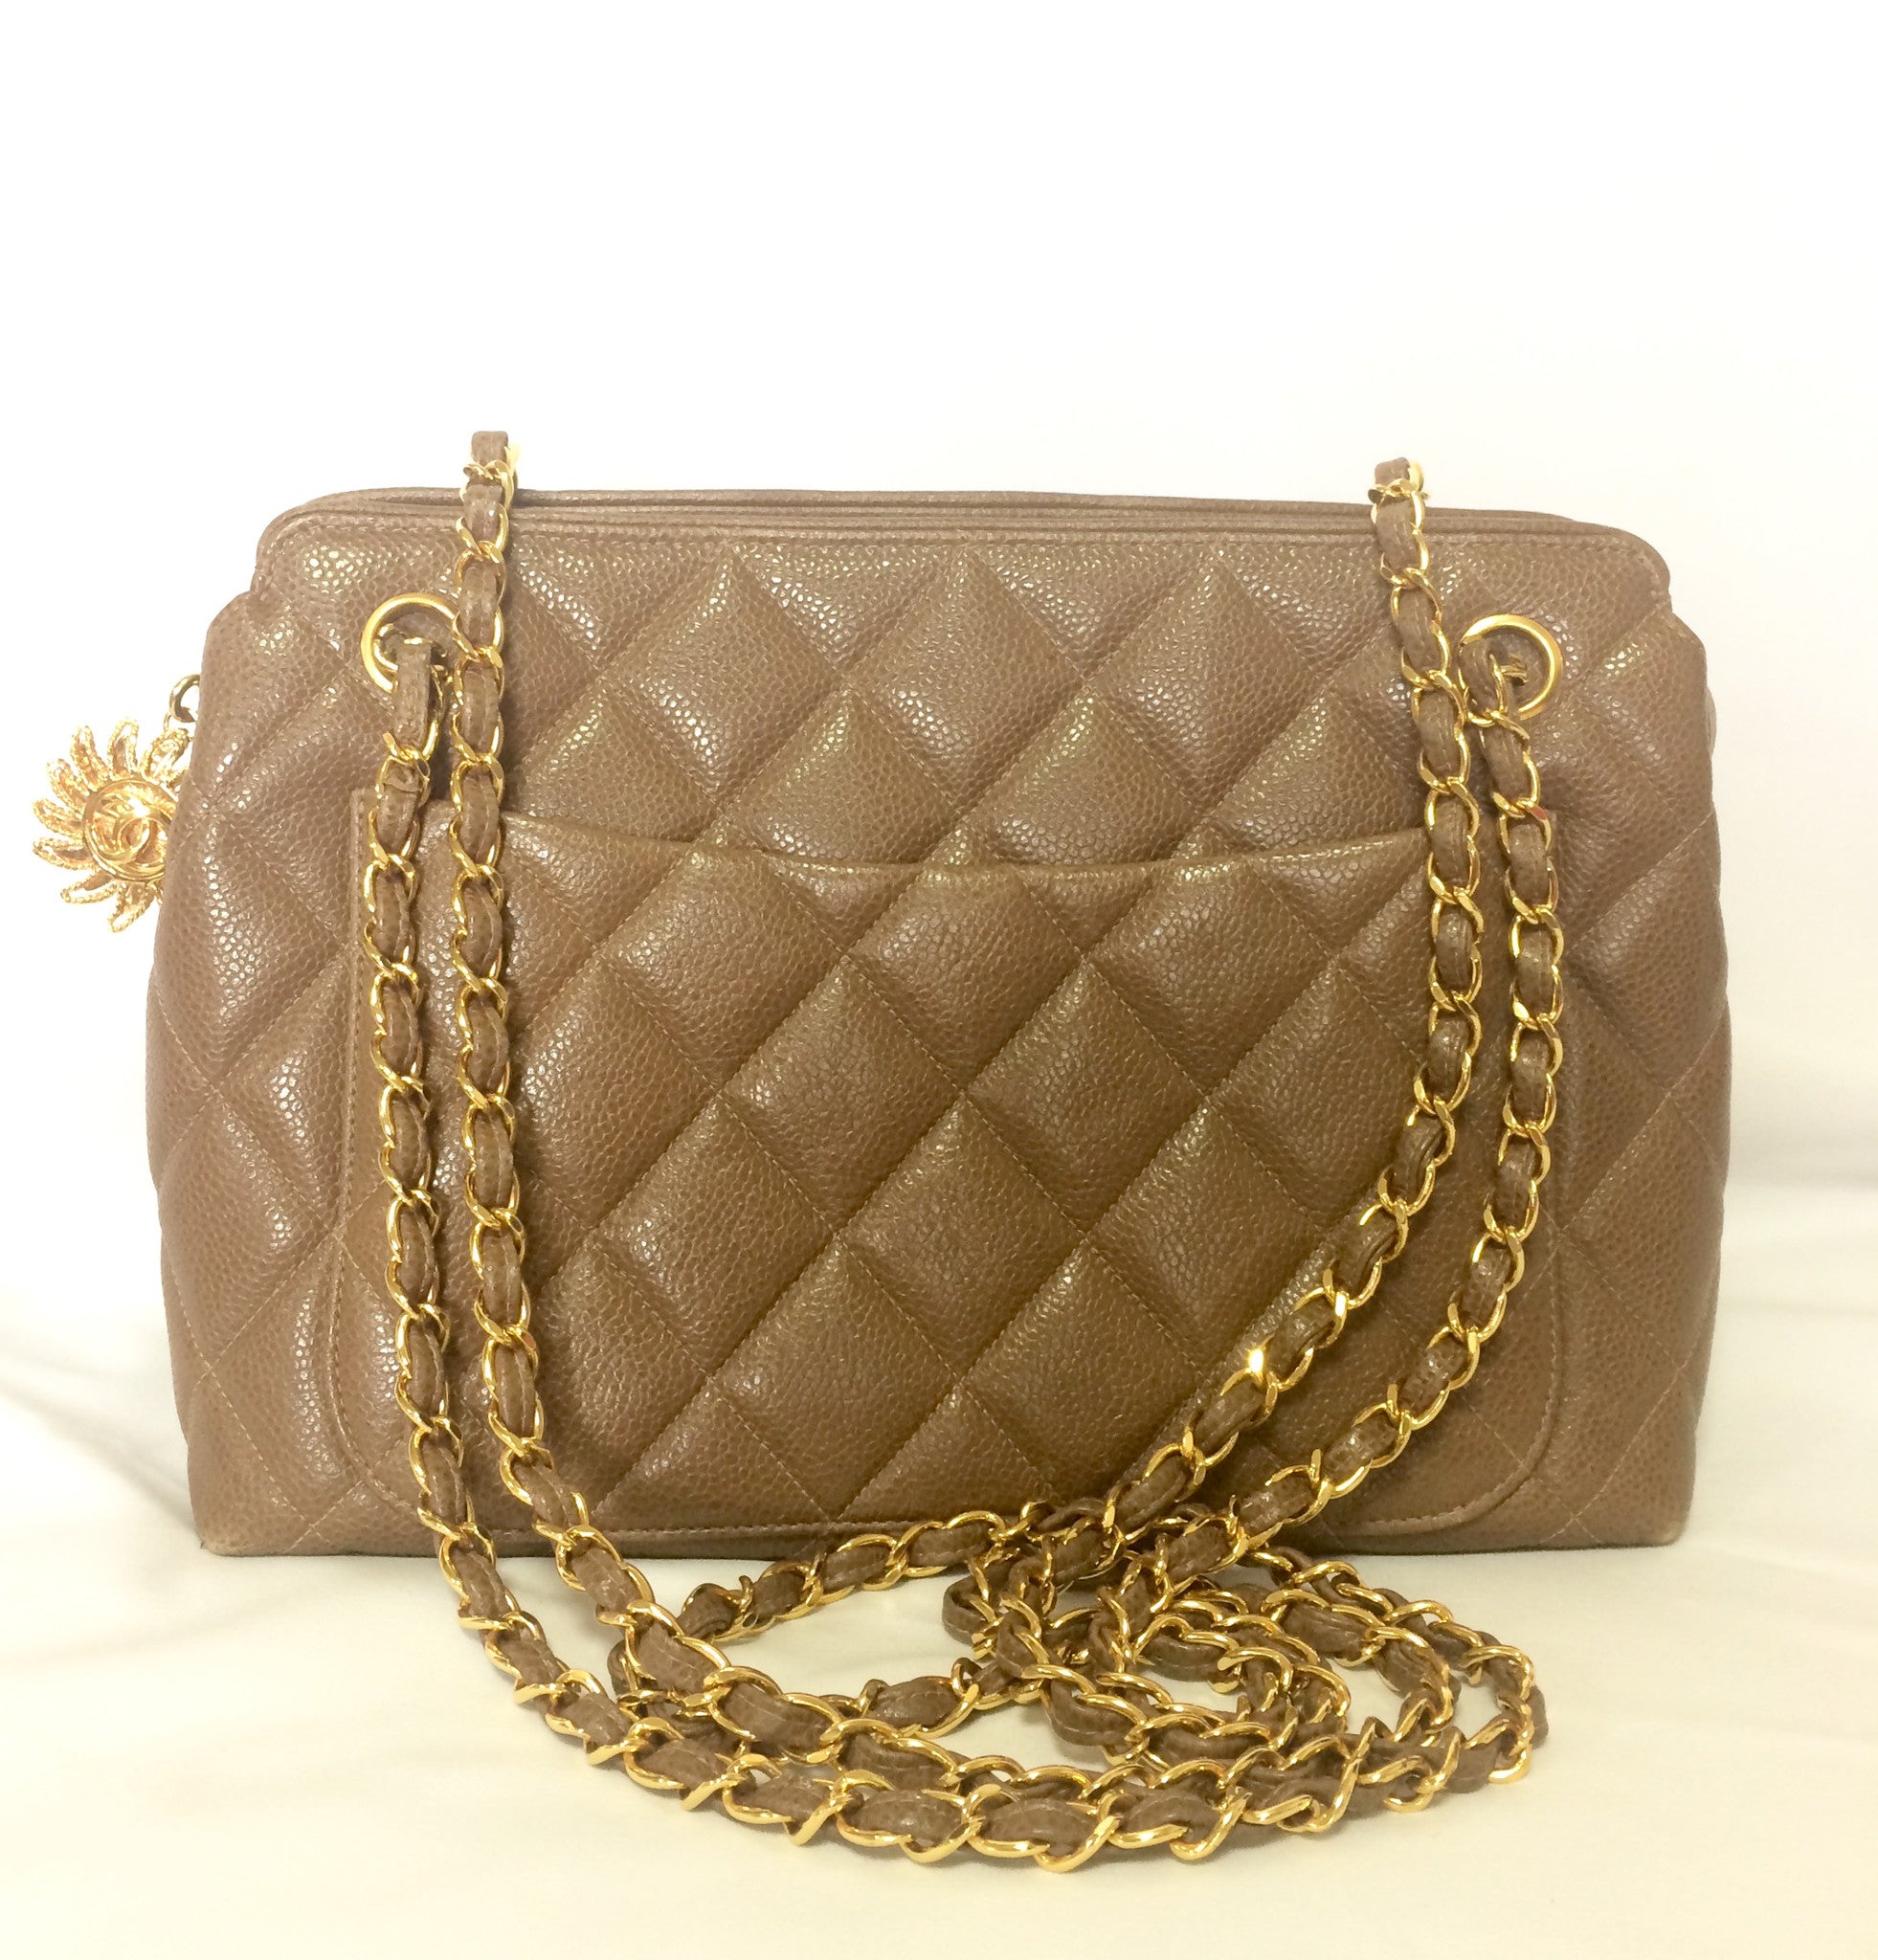 gold chain with chanel charm for bags